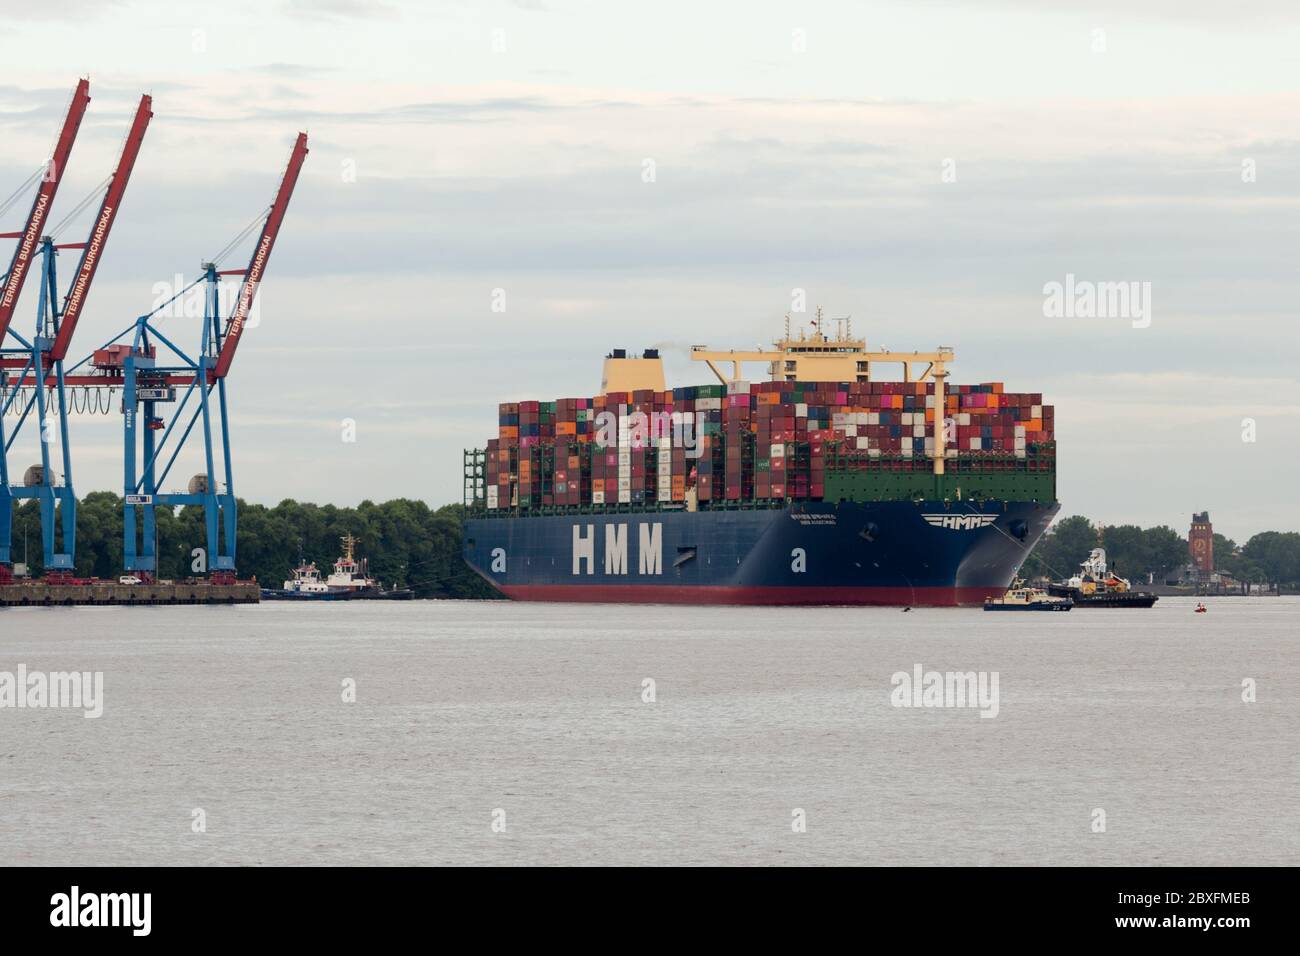 Hamburg Germany 7th June 2020 The Largest Container Ship In The World The Hmm Algeciras Arrived In Hamburg The South Korean Shipping Firm S Vessel Is Capable Of Carrying 23 964 Teus Or 20 Foot,Most Popular Benjamin Moore Blue Green Paint Colors